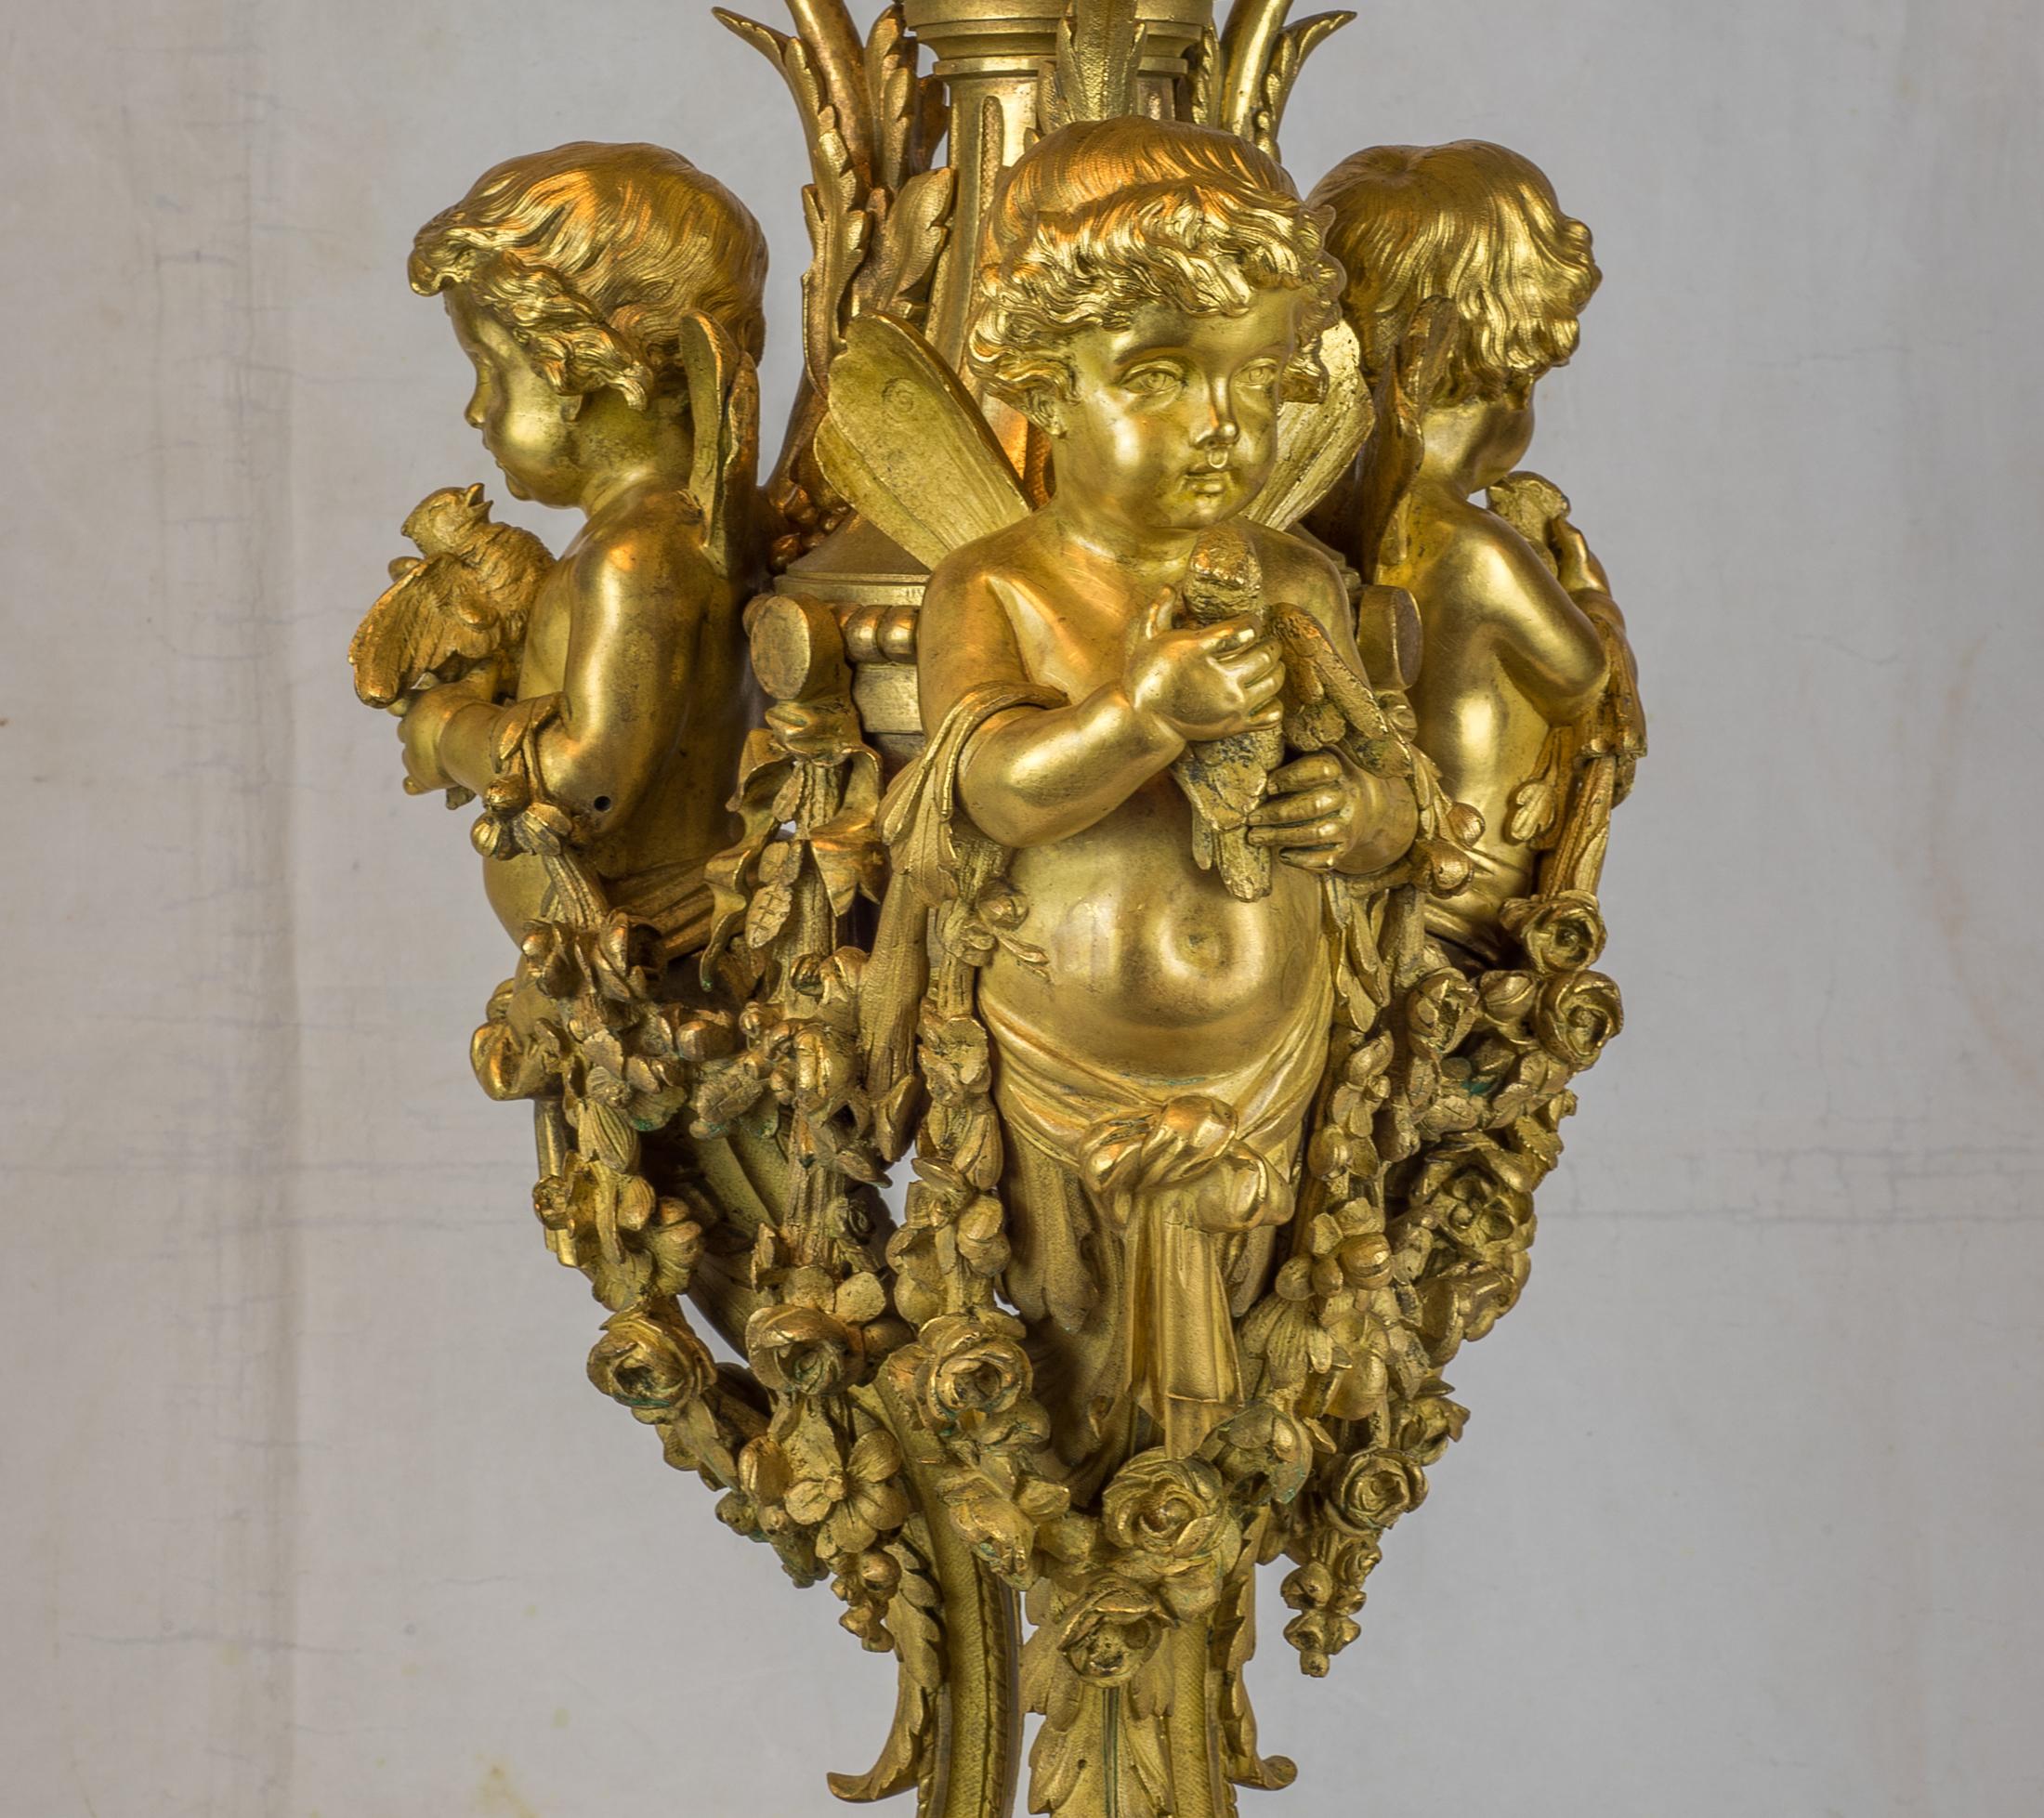 Important Pair of 19th Century French Ormolu Ten-Light Candelabra by H. Picard For Sale 2